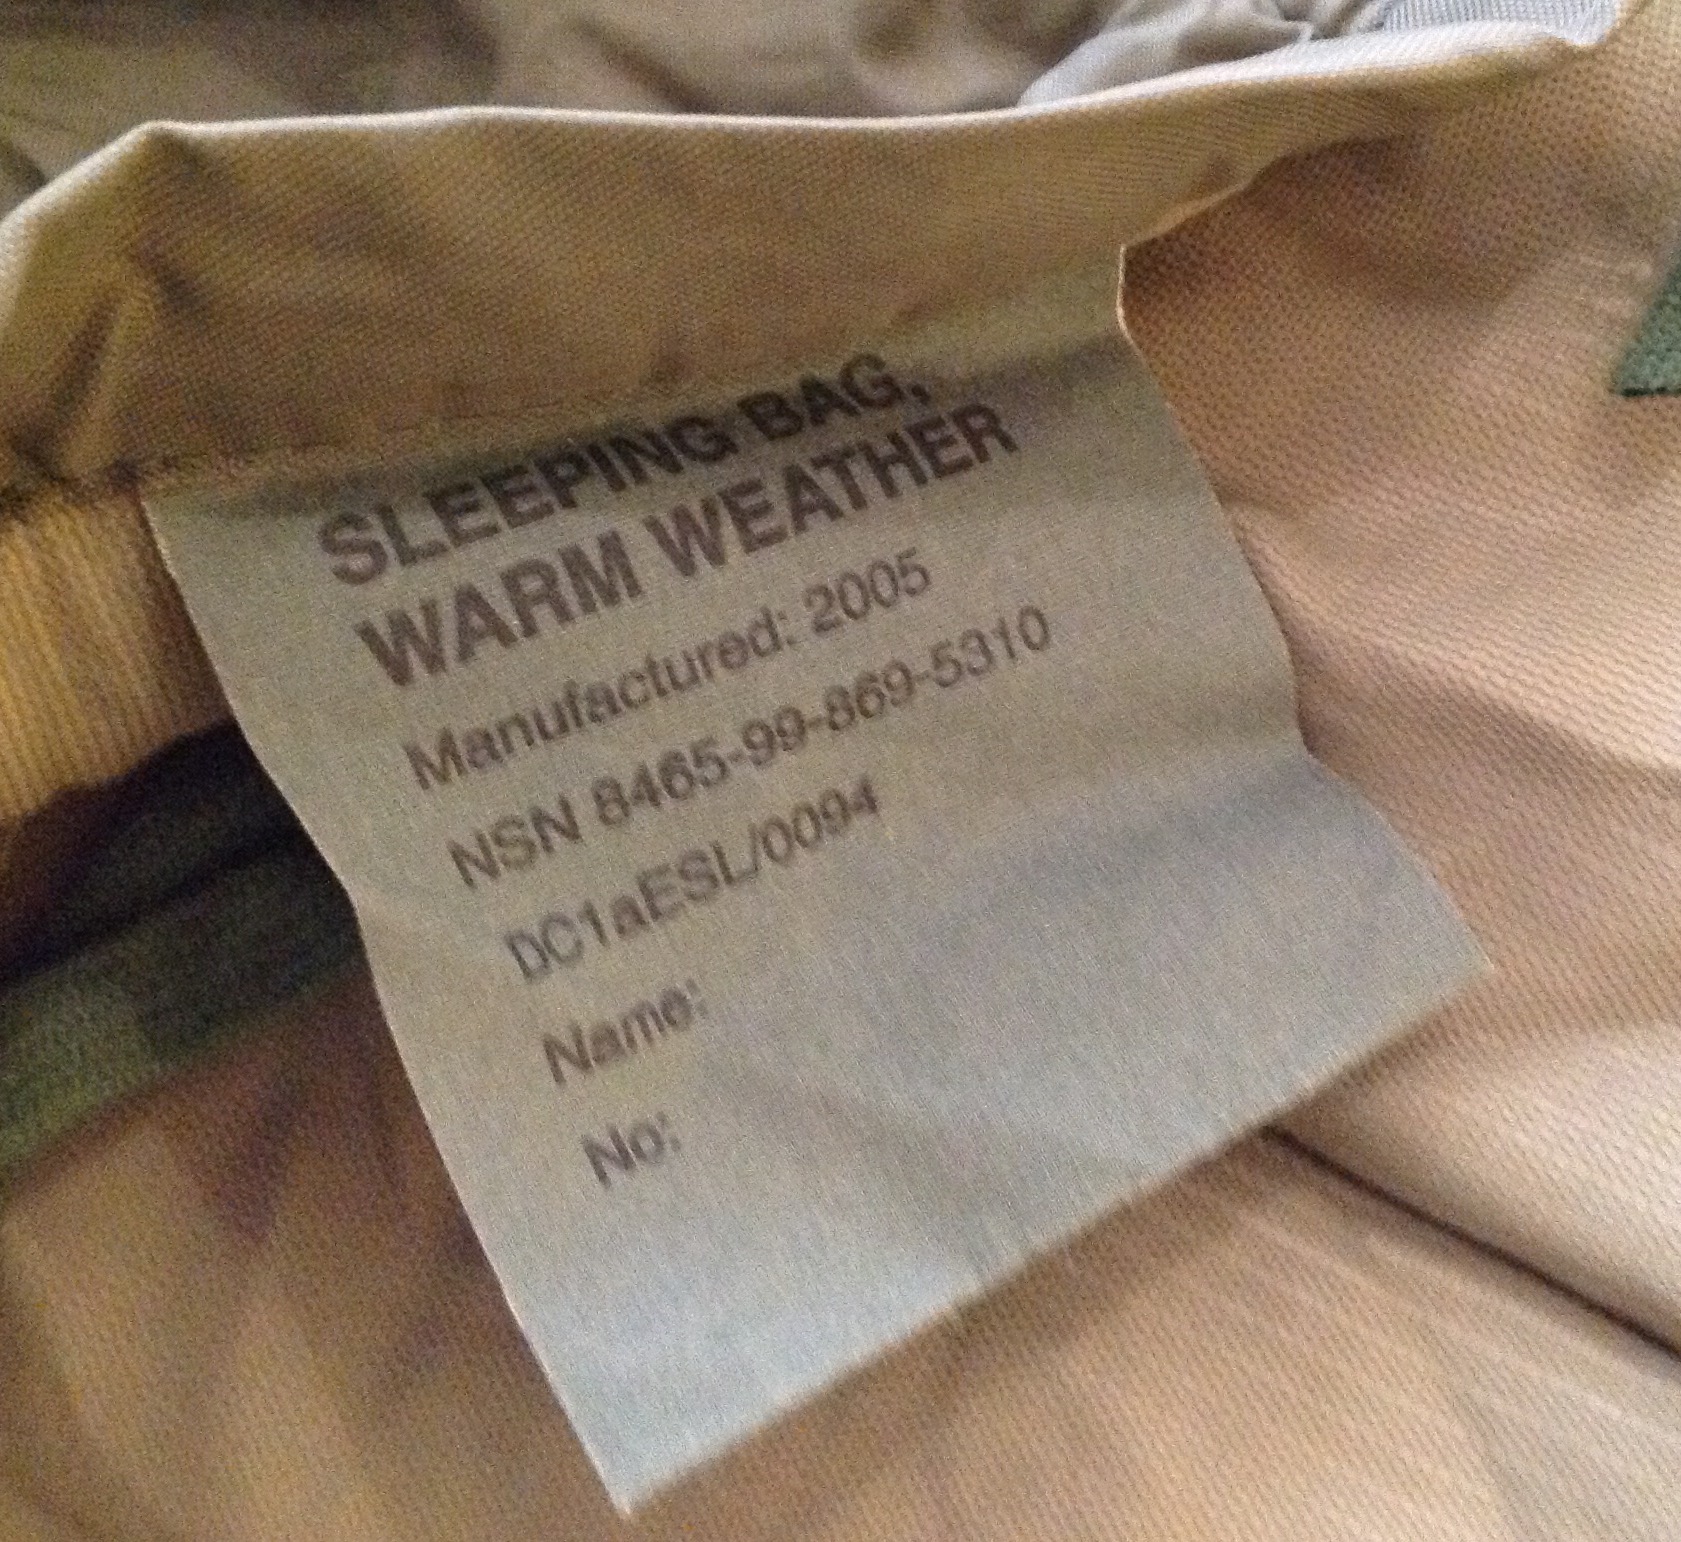 British Army Warm Weather Sleeping Bag – Tales from the Supply Depot